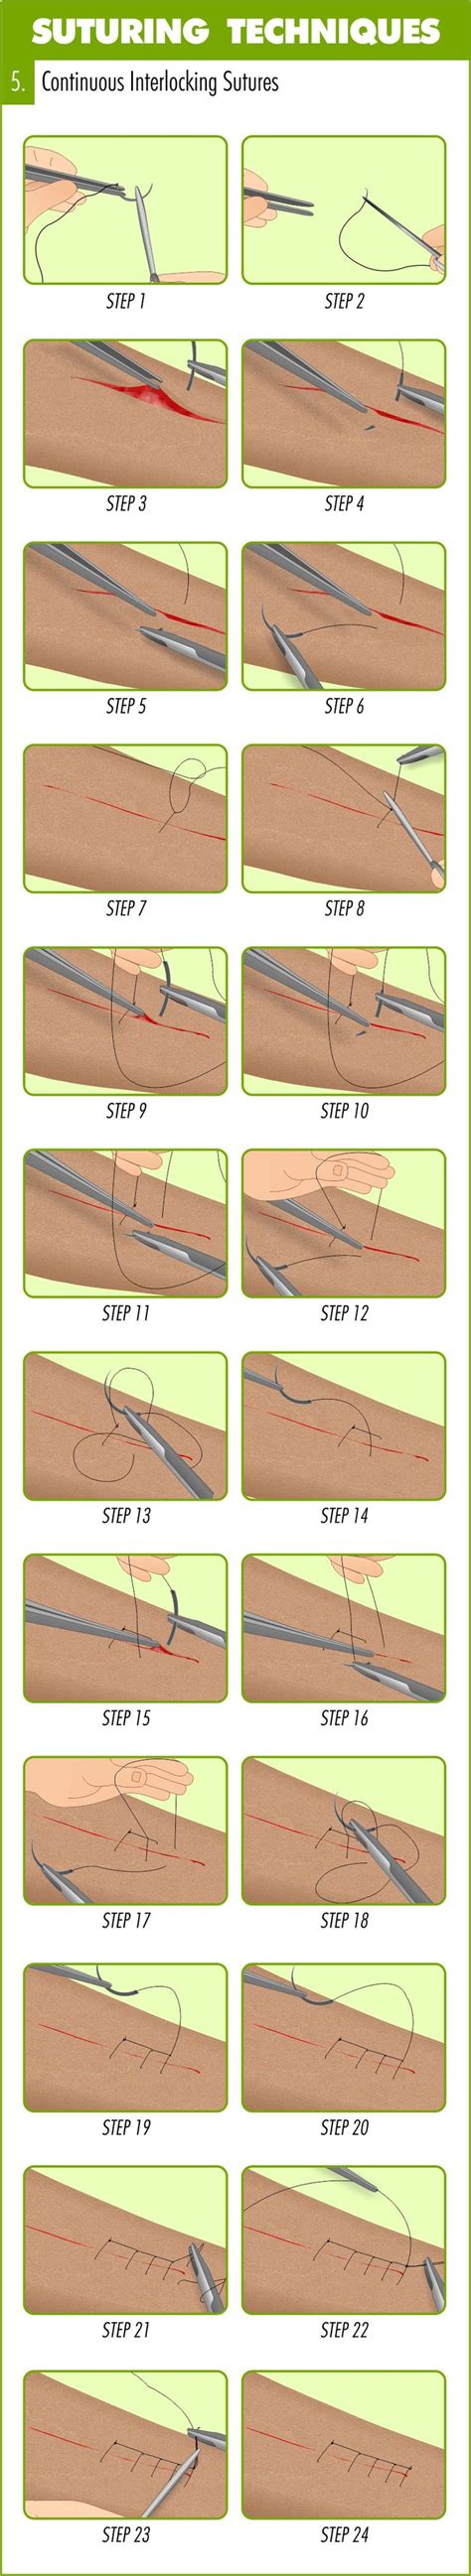 Complete Guide To Mastering Suturing Techniques Suture Techniques